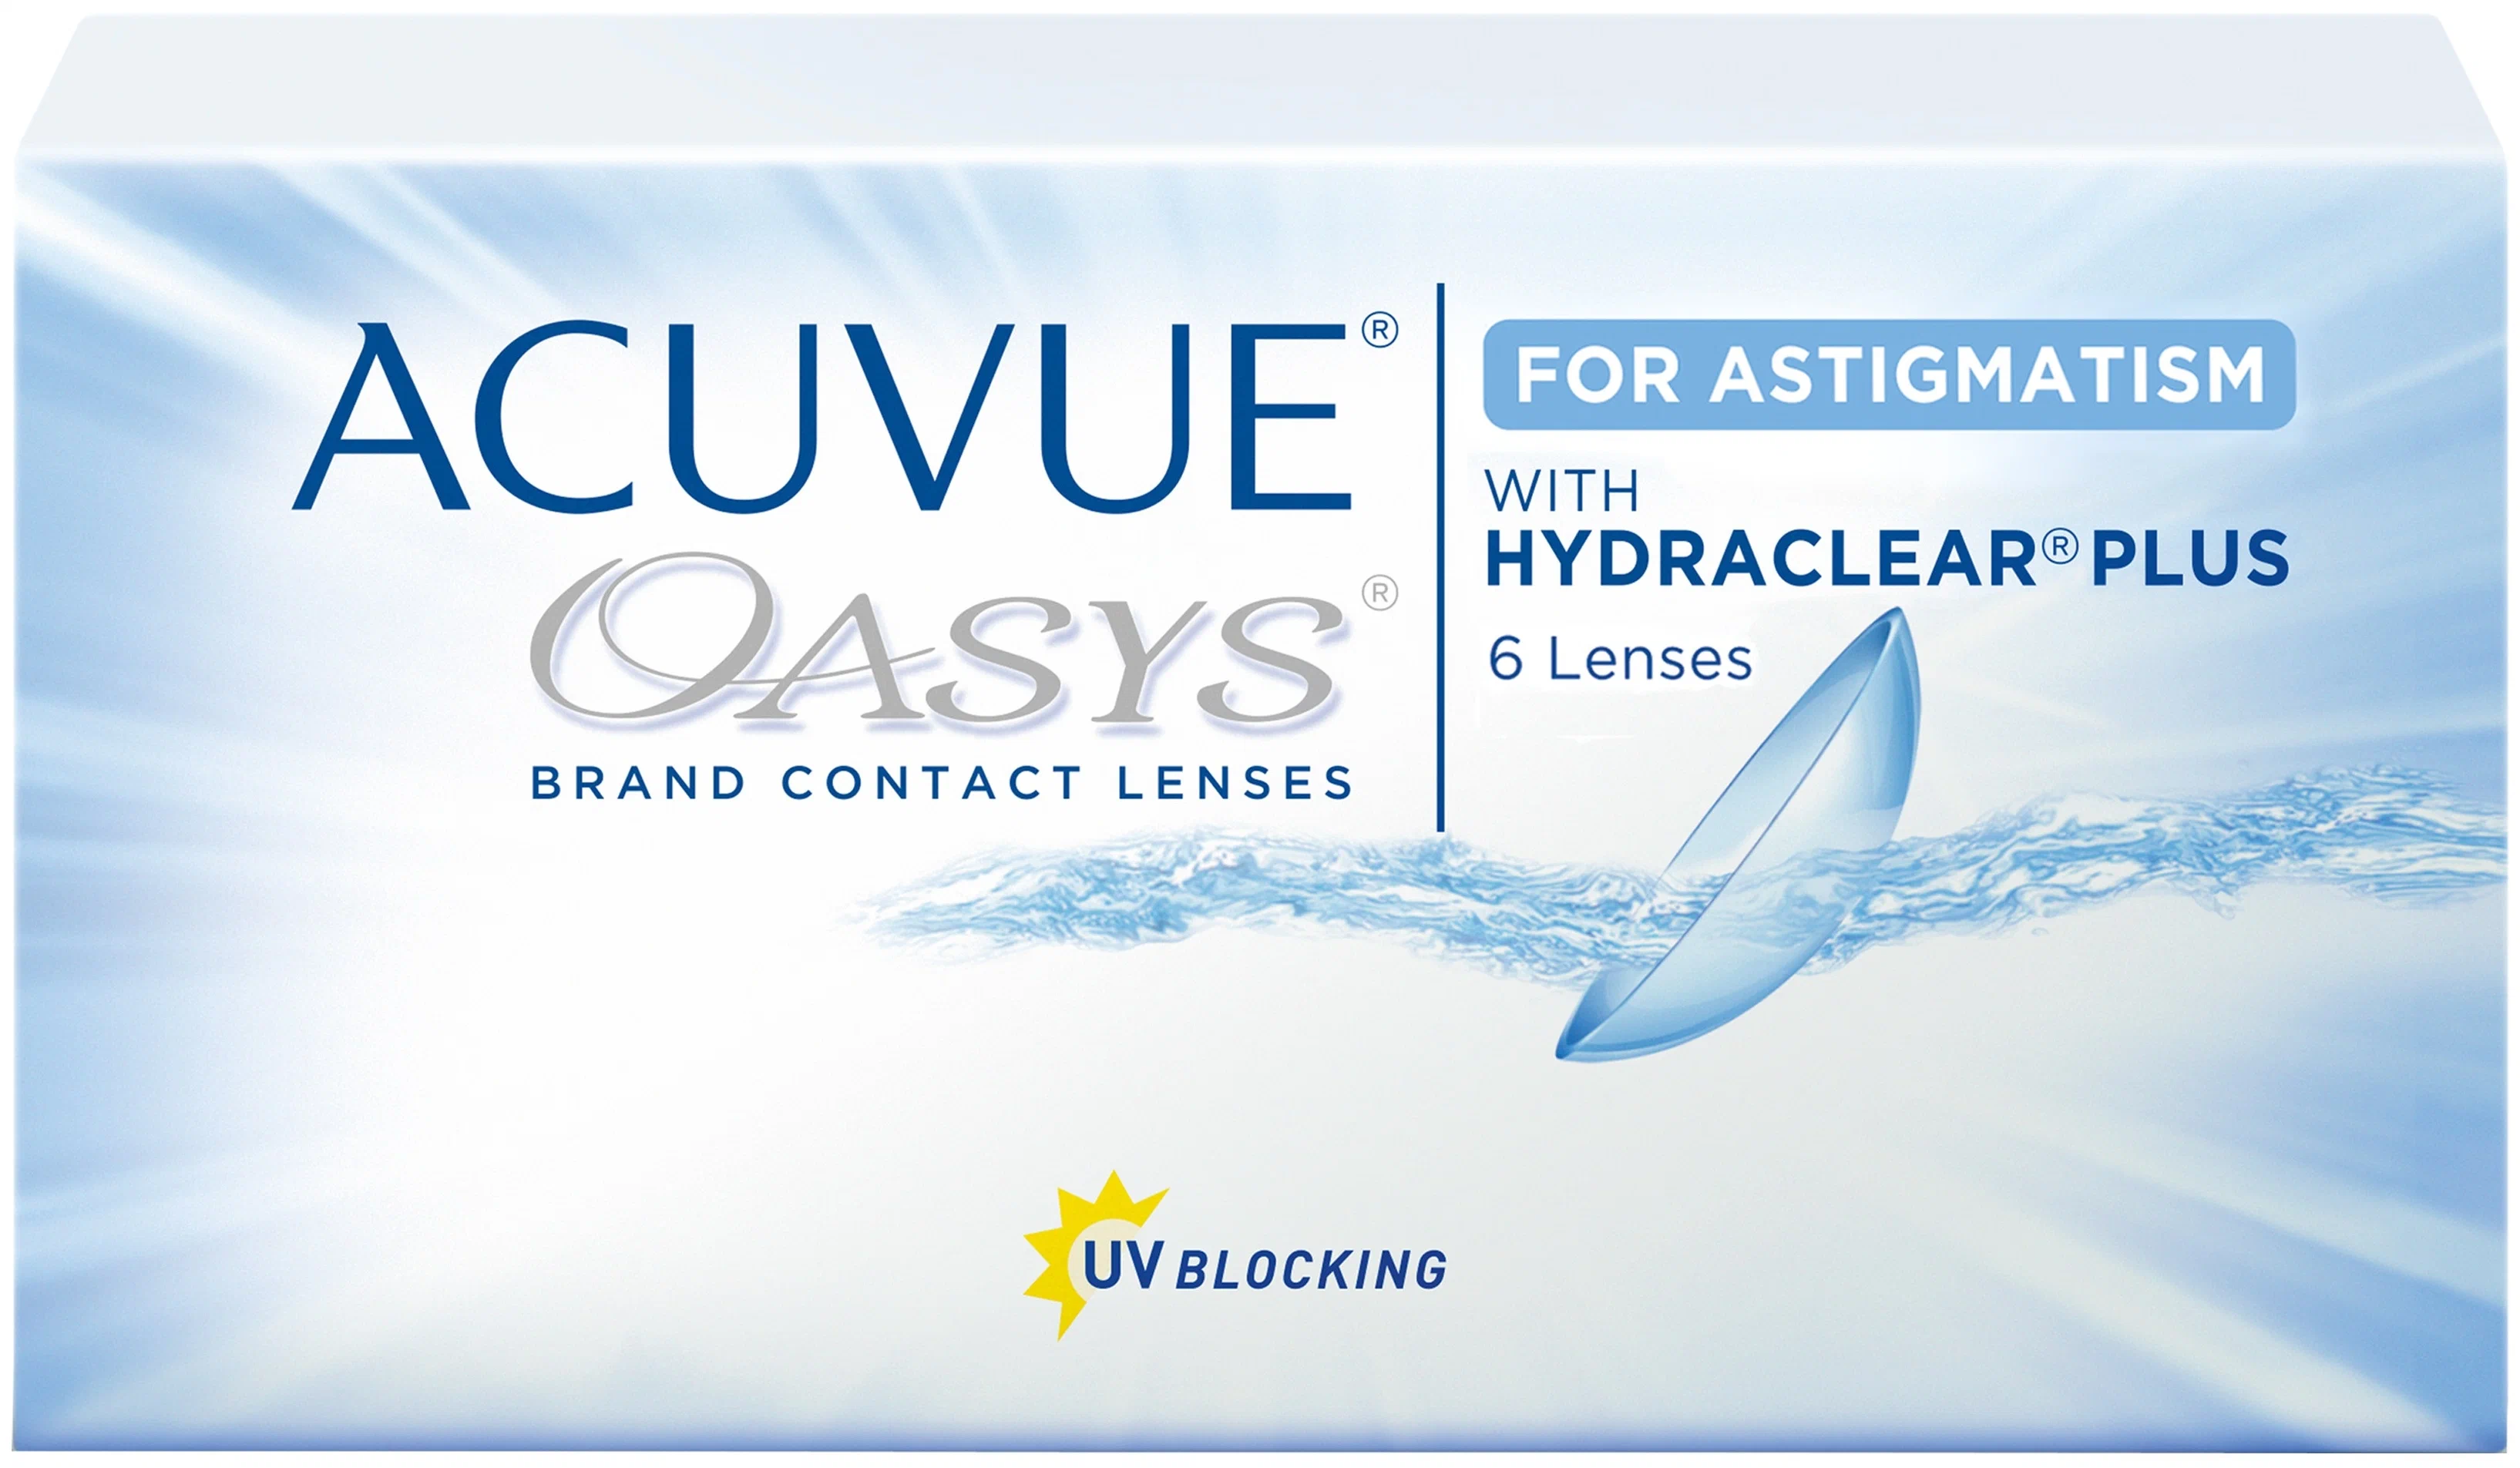 Acuvue OASYS for Astigmatism with Hydraclear Plus, 6 шт. - частота замены: две недели